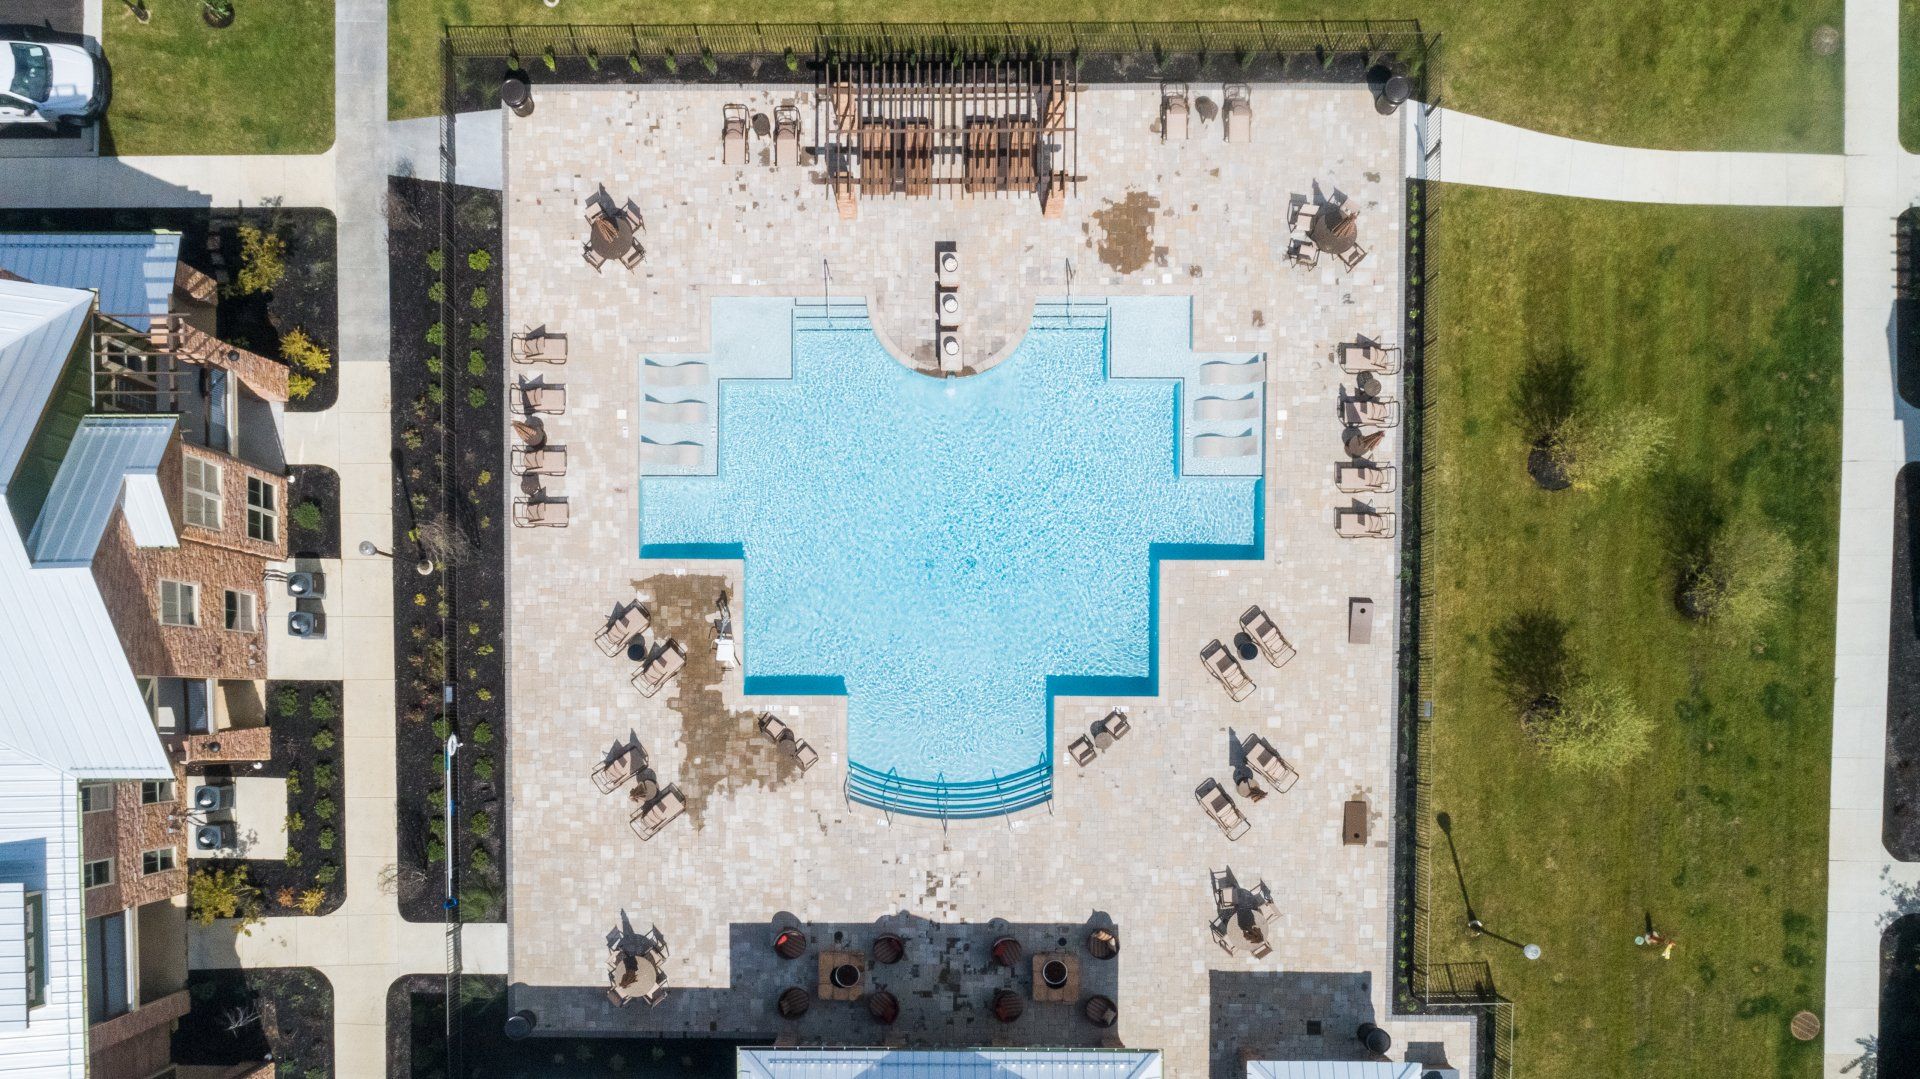 Aerial view of swimming pool